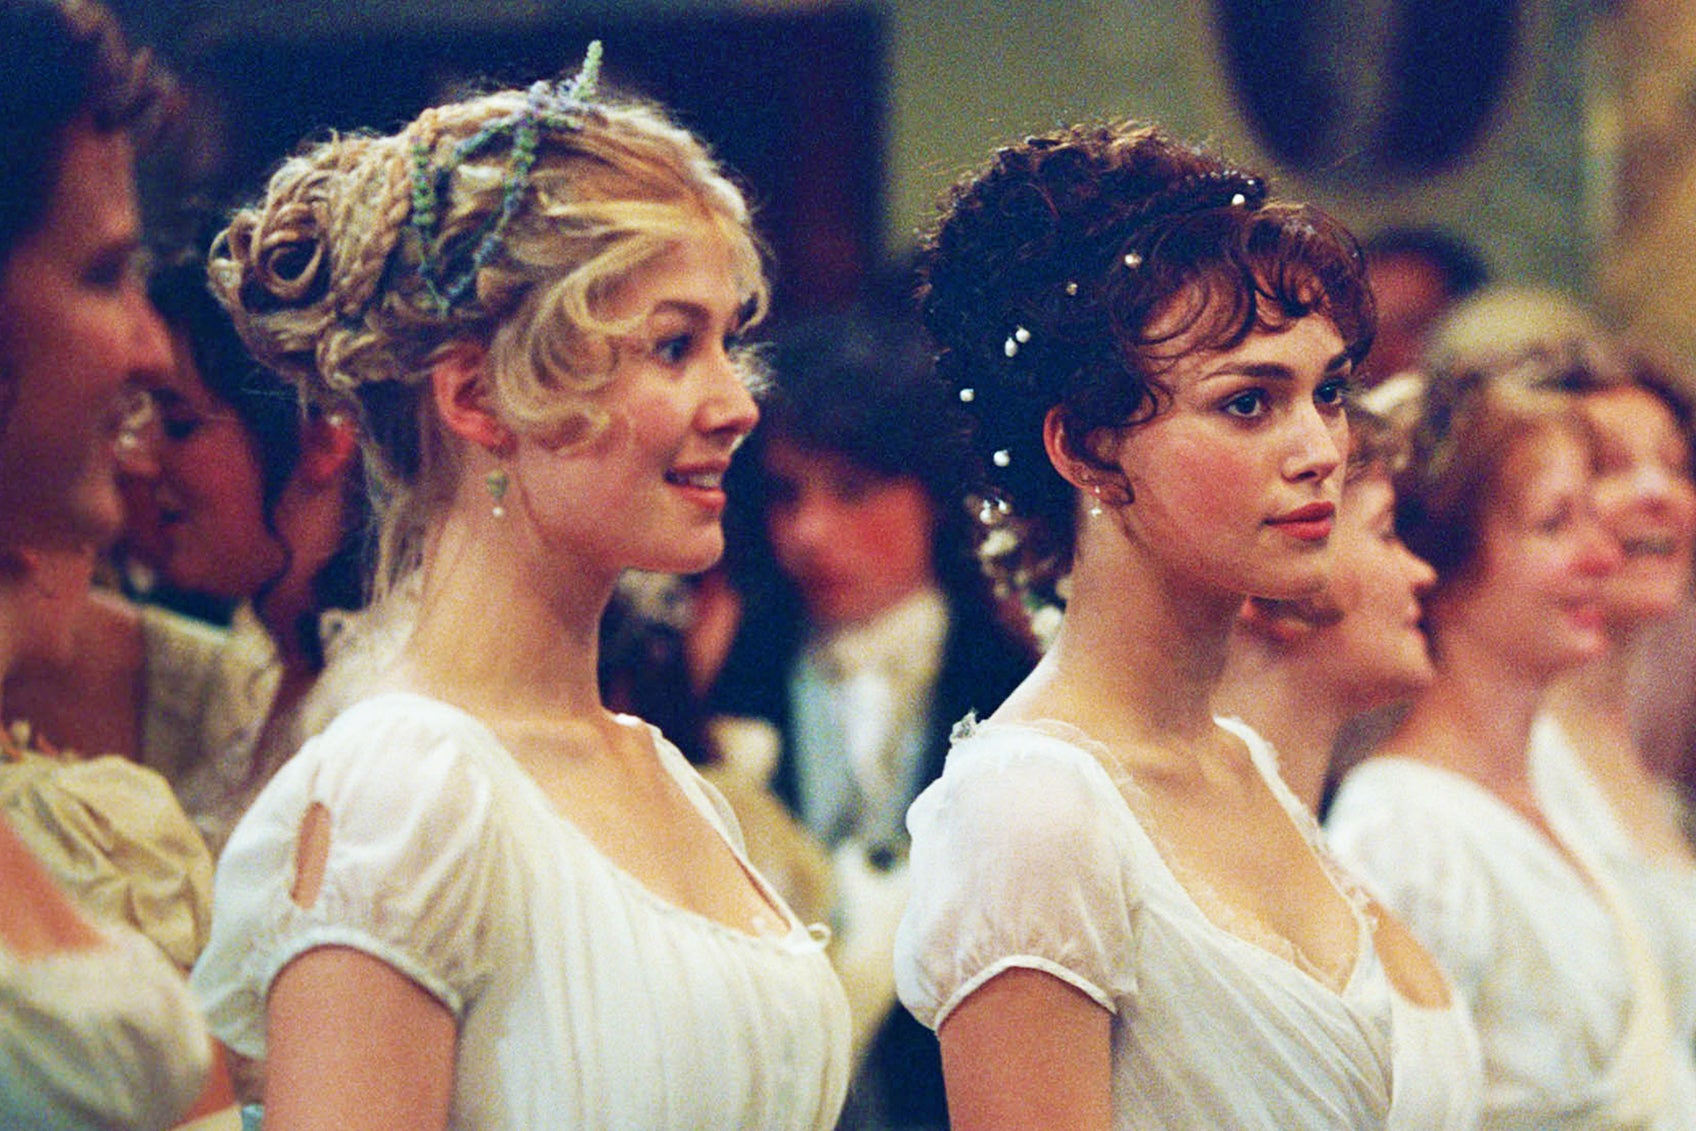 ‘Pride and Prejudice’ matriarch Mrs Bennet schemes to find husbands for her daughters – played in the 2005 film by stars including Rosamund Pike and Keira Knightley – but she’s not scheming for no reason at all